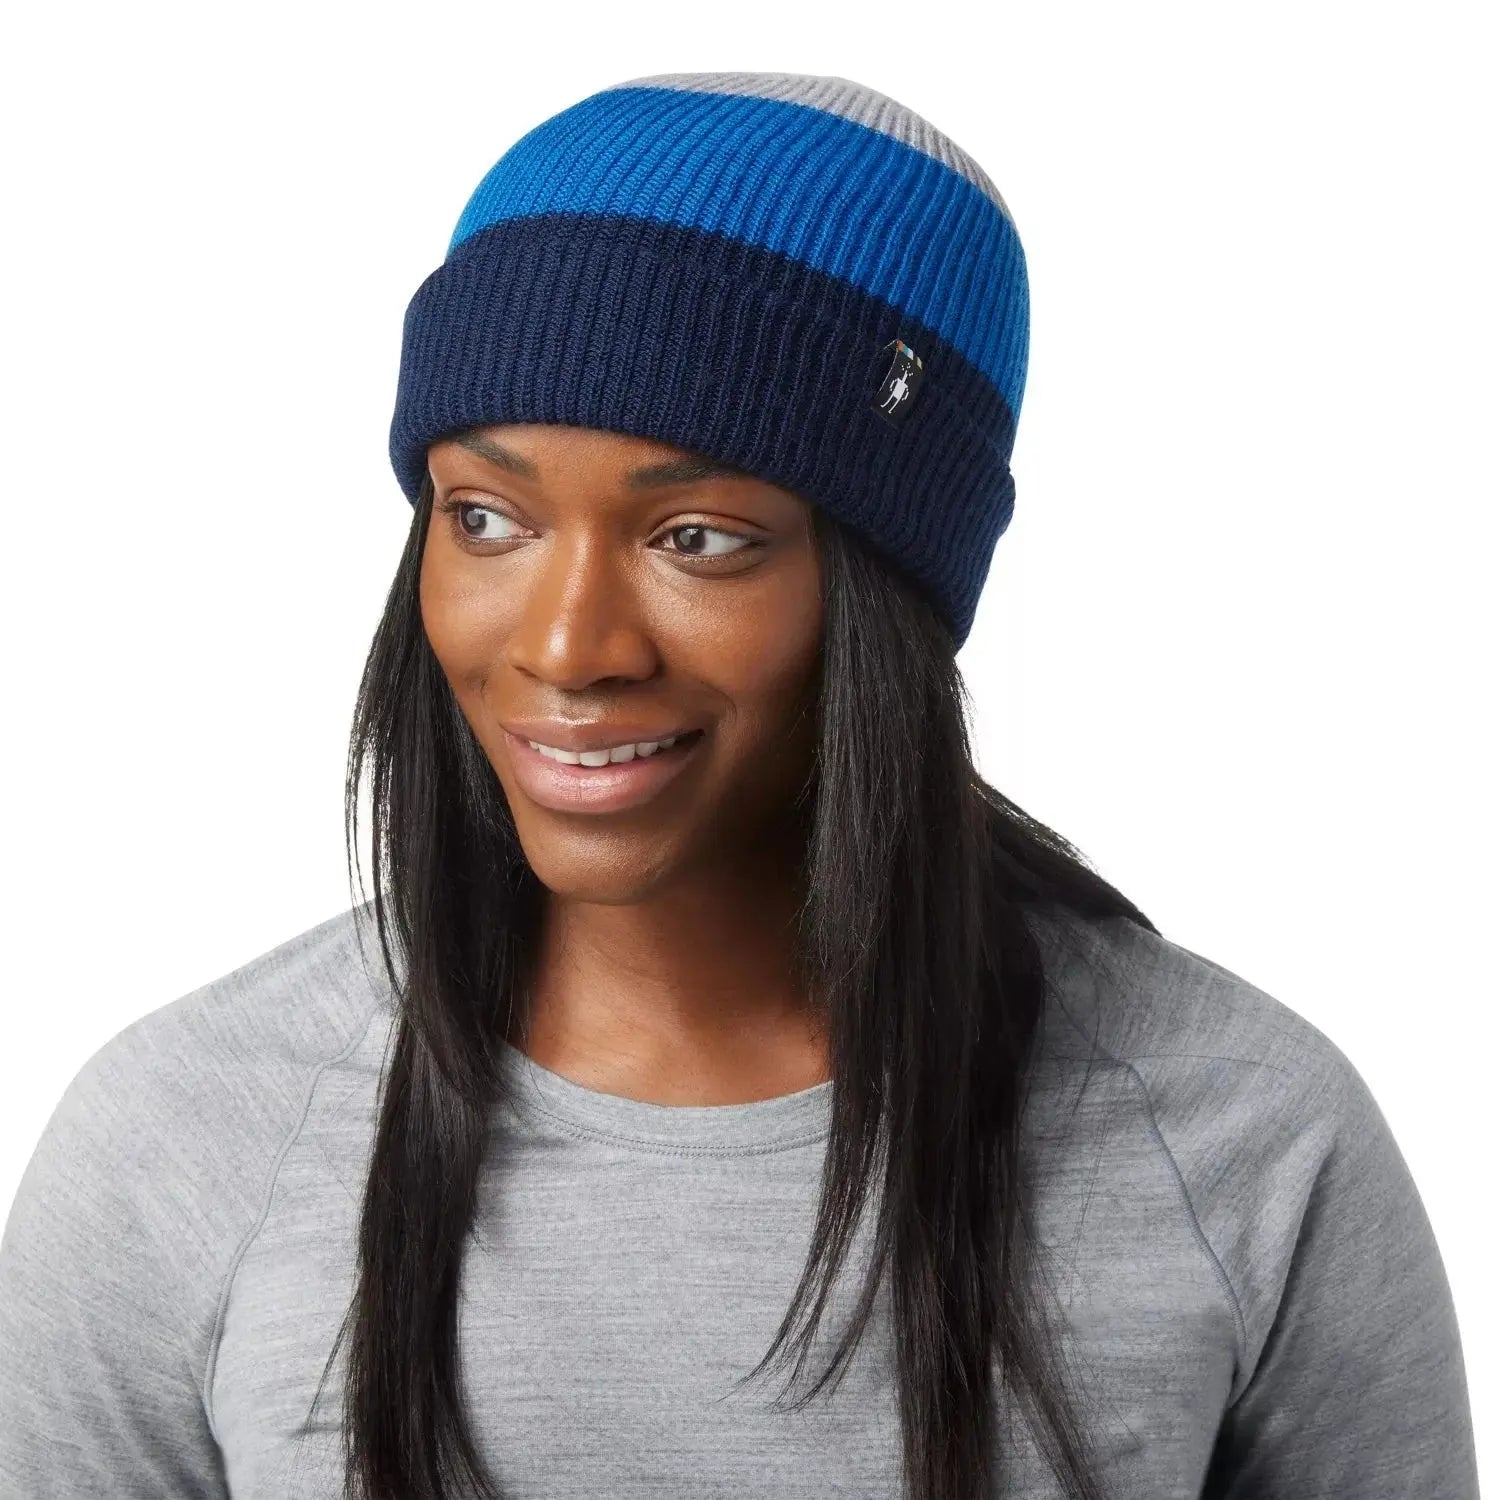 Smartwool Cantar Colorblock Beanie, Laguna Blue, front view on model